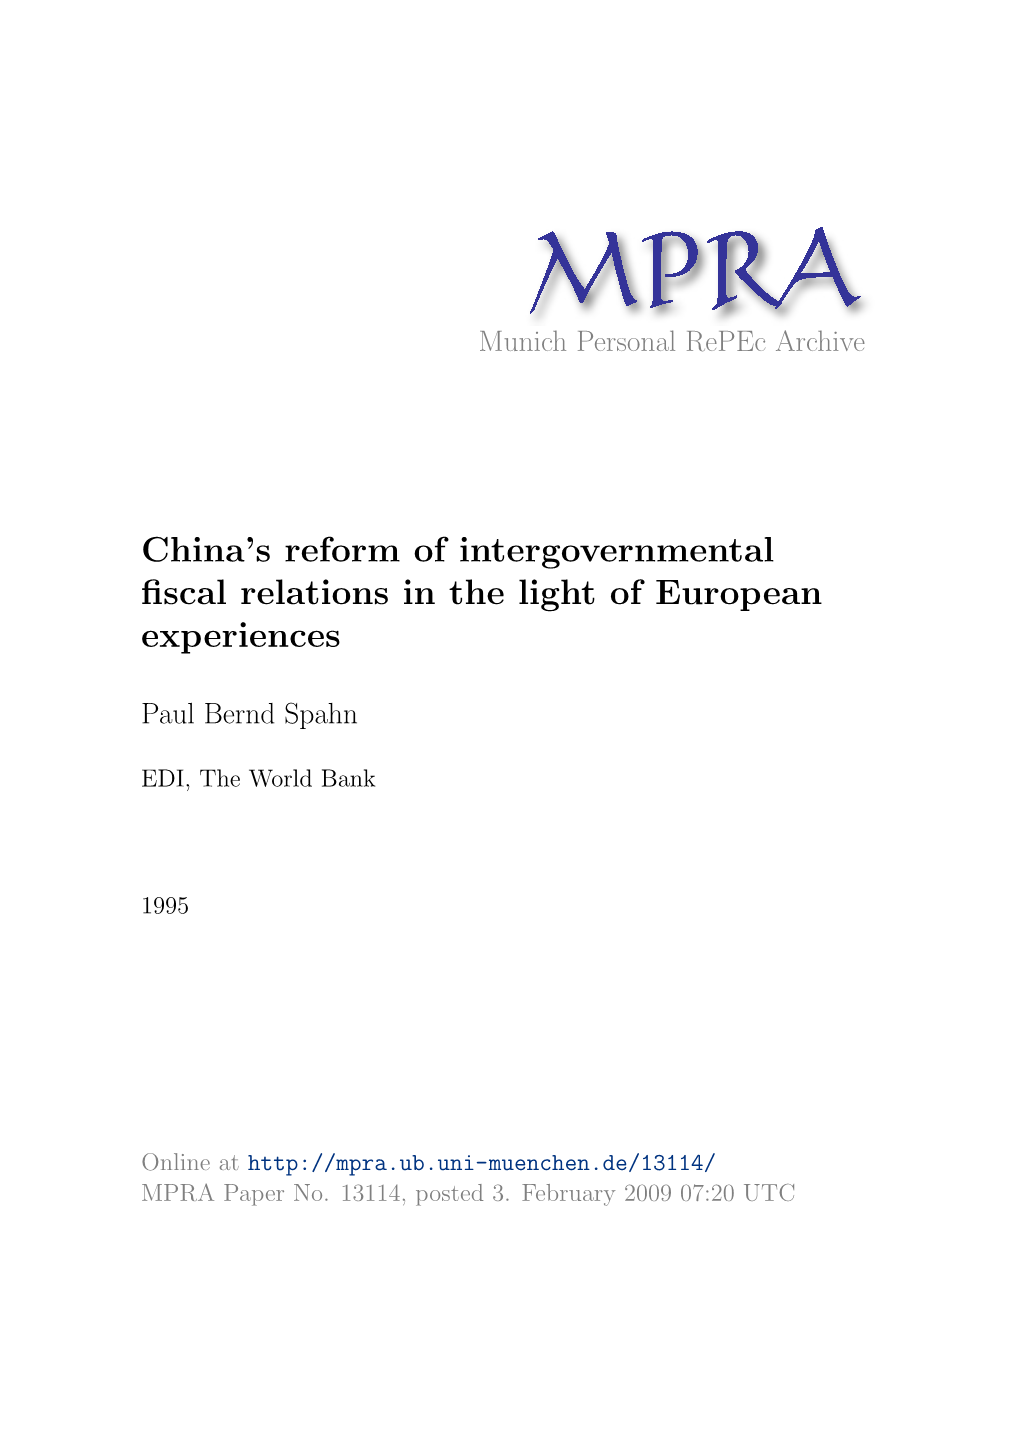 China's Reform of Intergovernmental Fiscal Relations in the Light of European Experiences by Paul Bernd Spahn